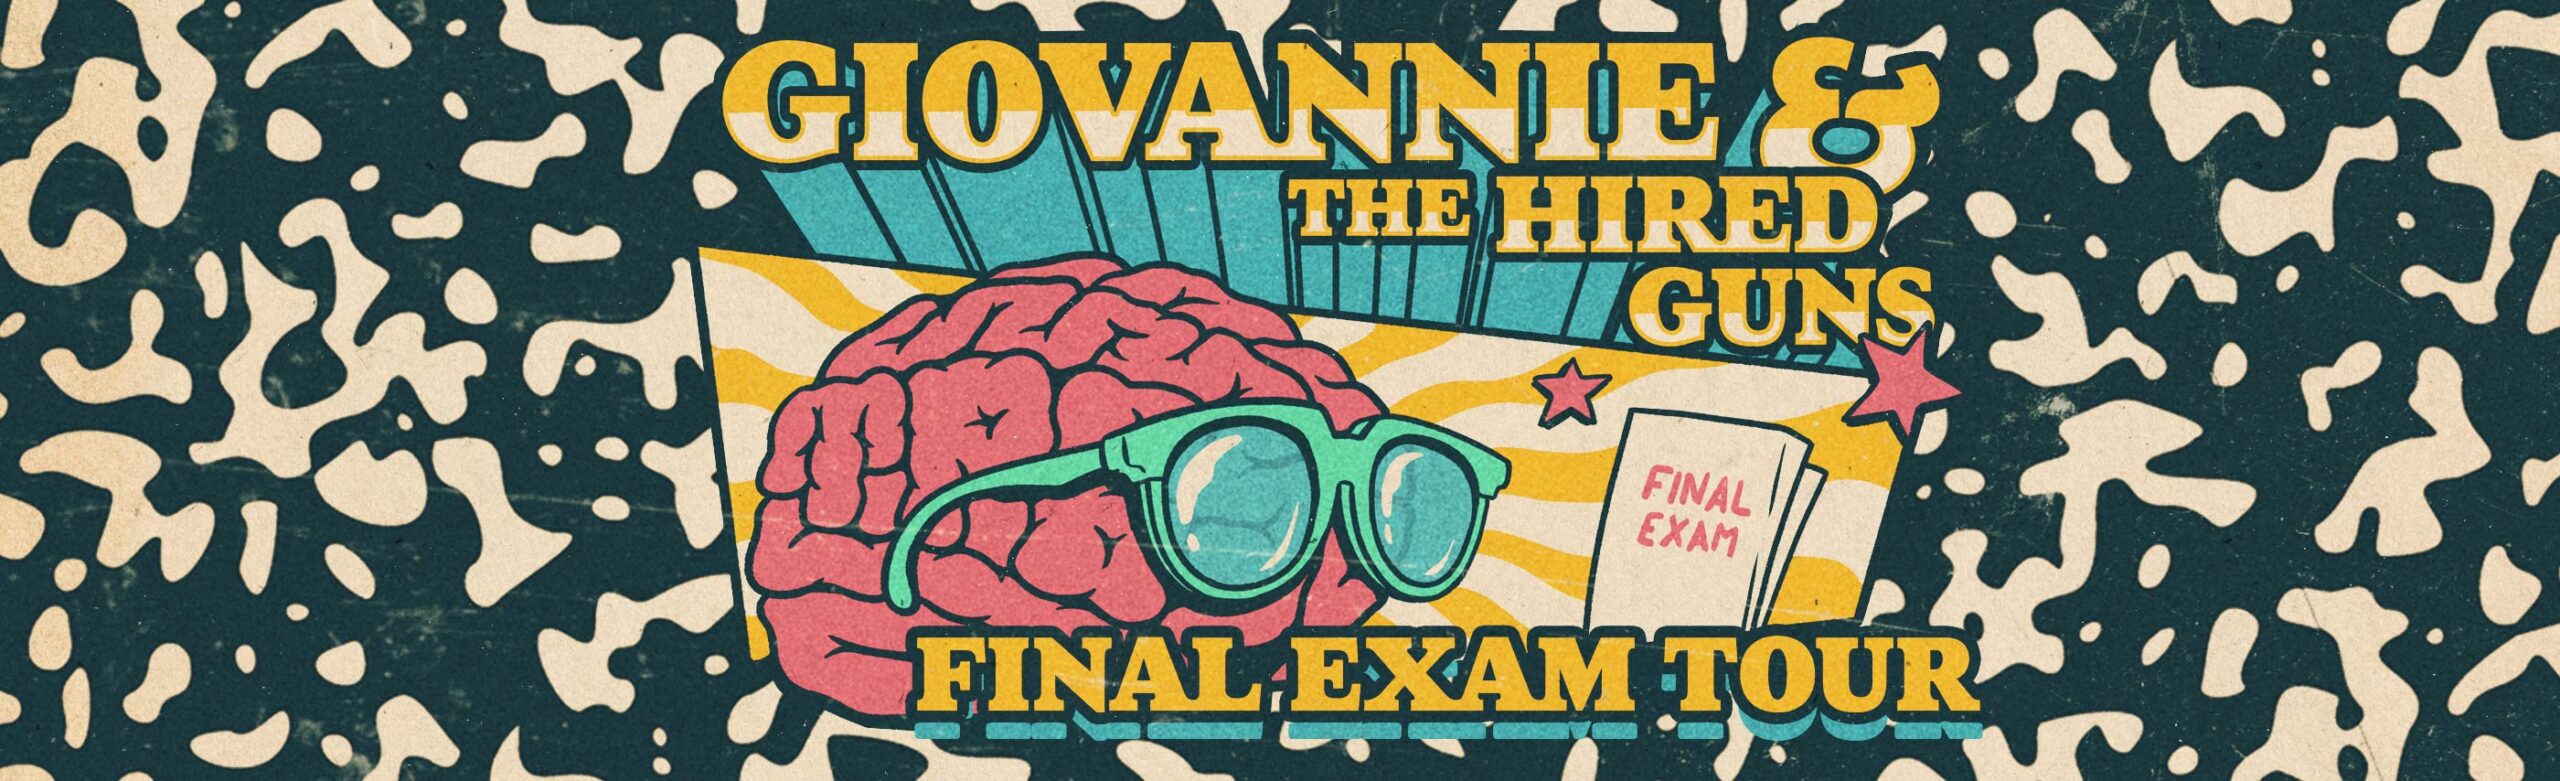 Giovannie and the Hired Guns Announce Concert in Bozeman Image